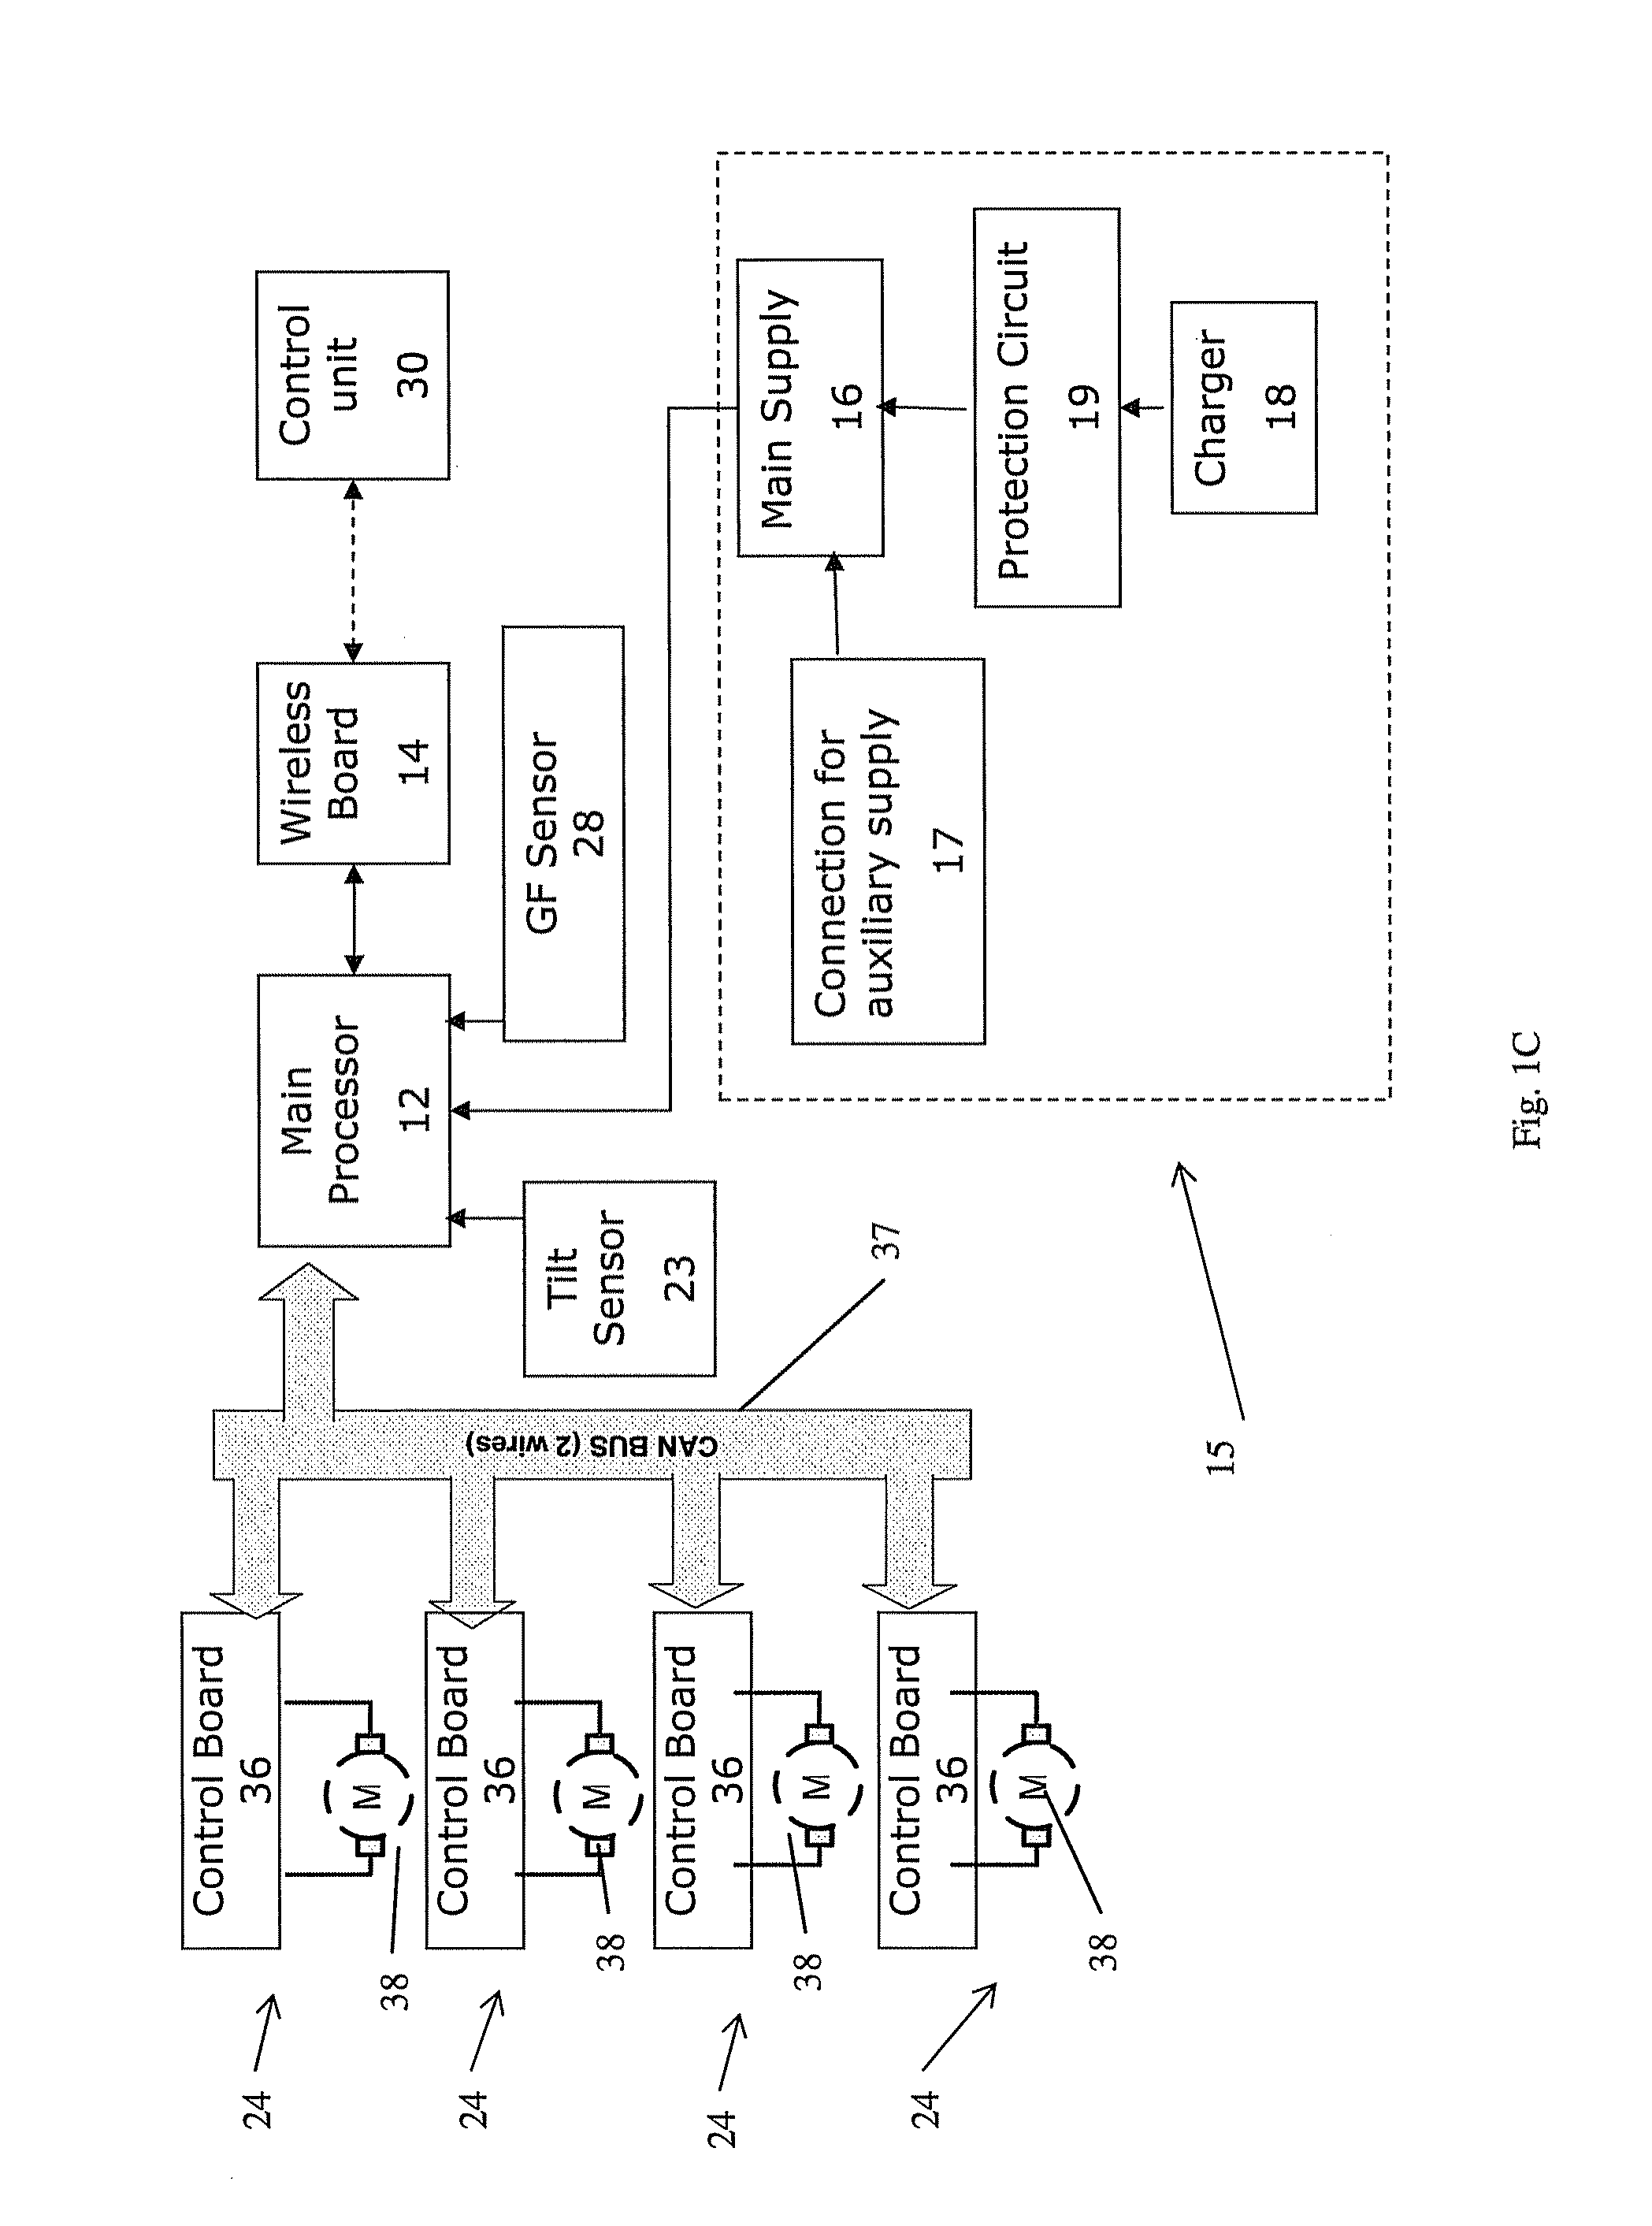 Locomotion assisting device and method